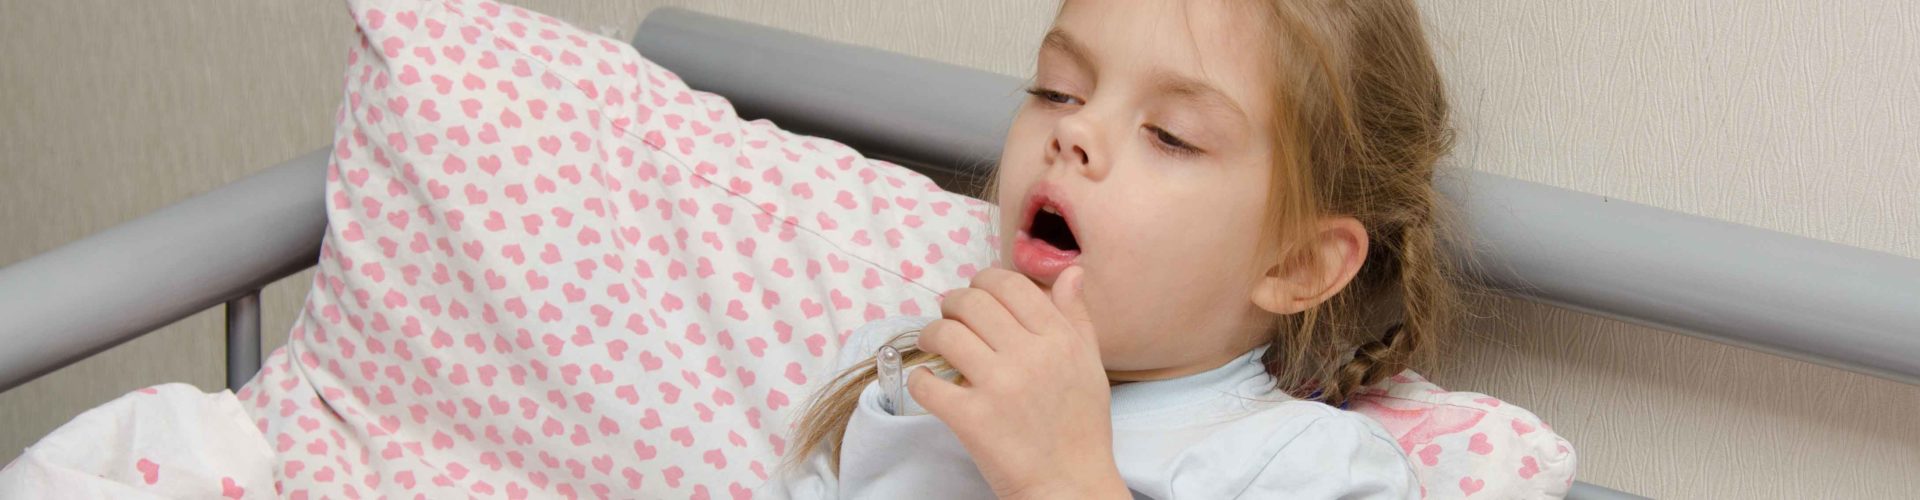 little girl coughing in bed